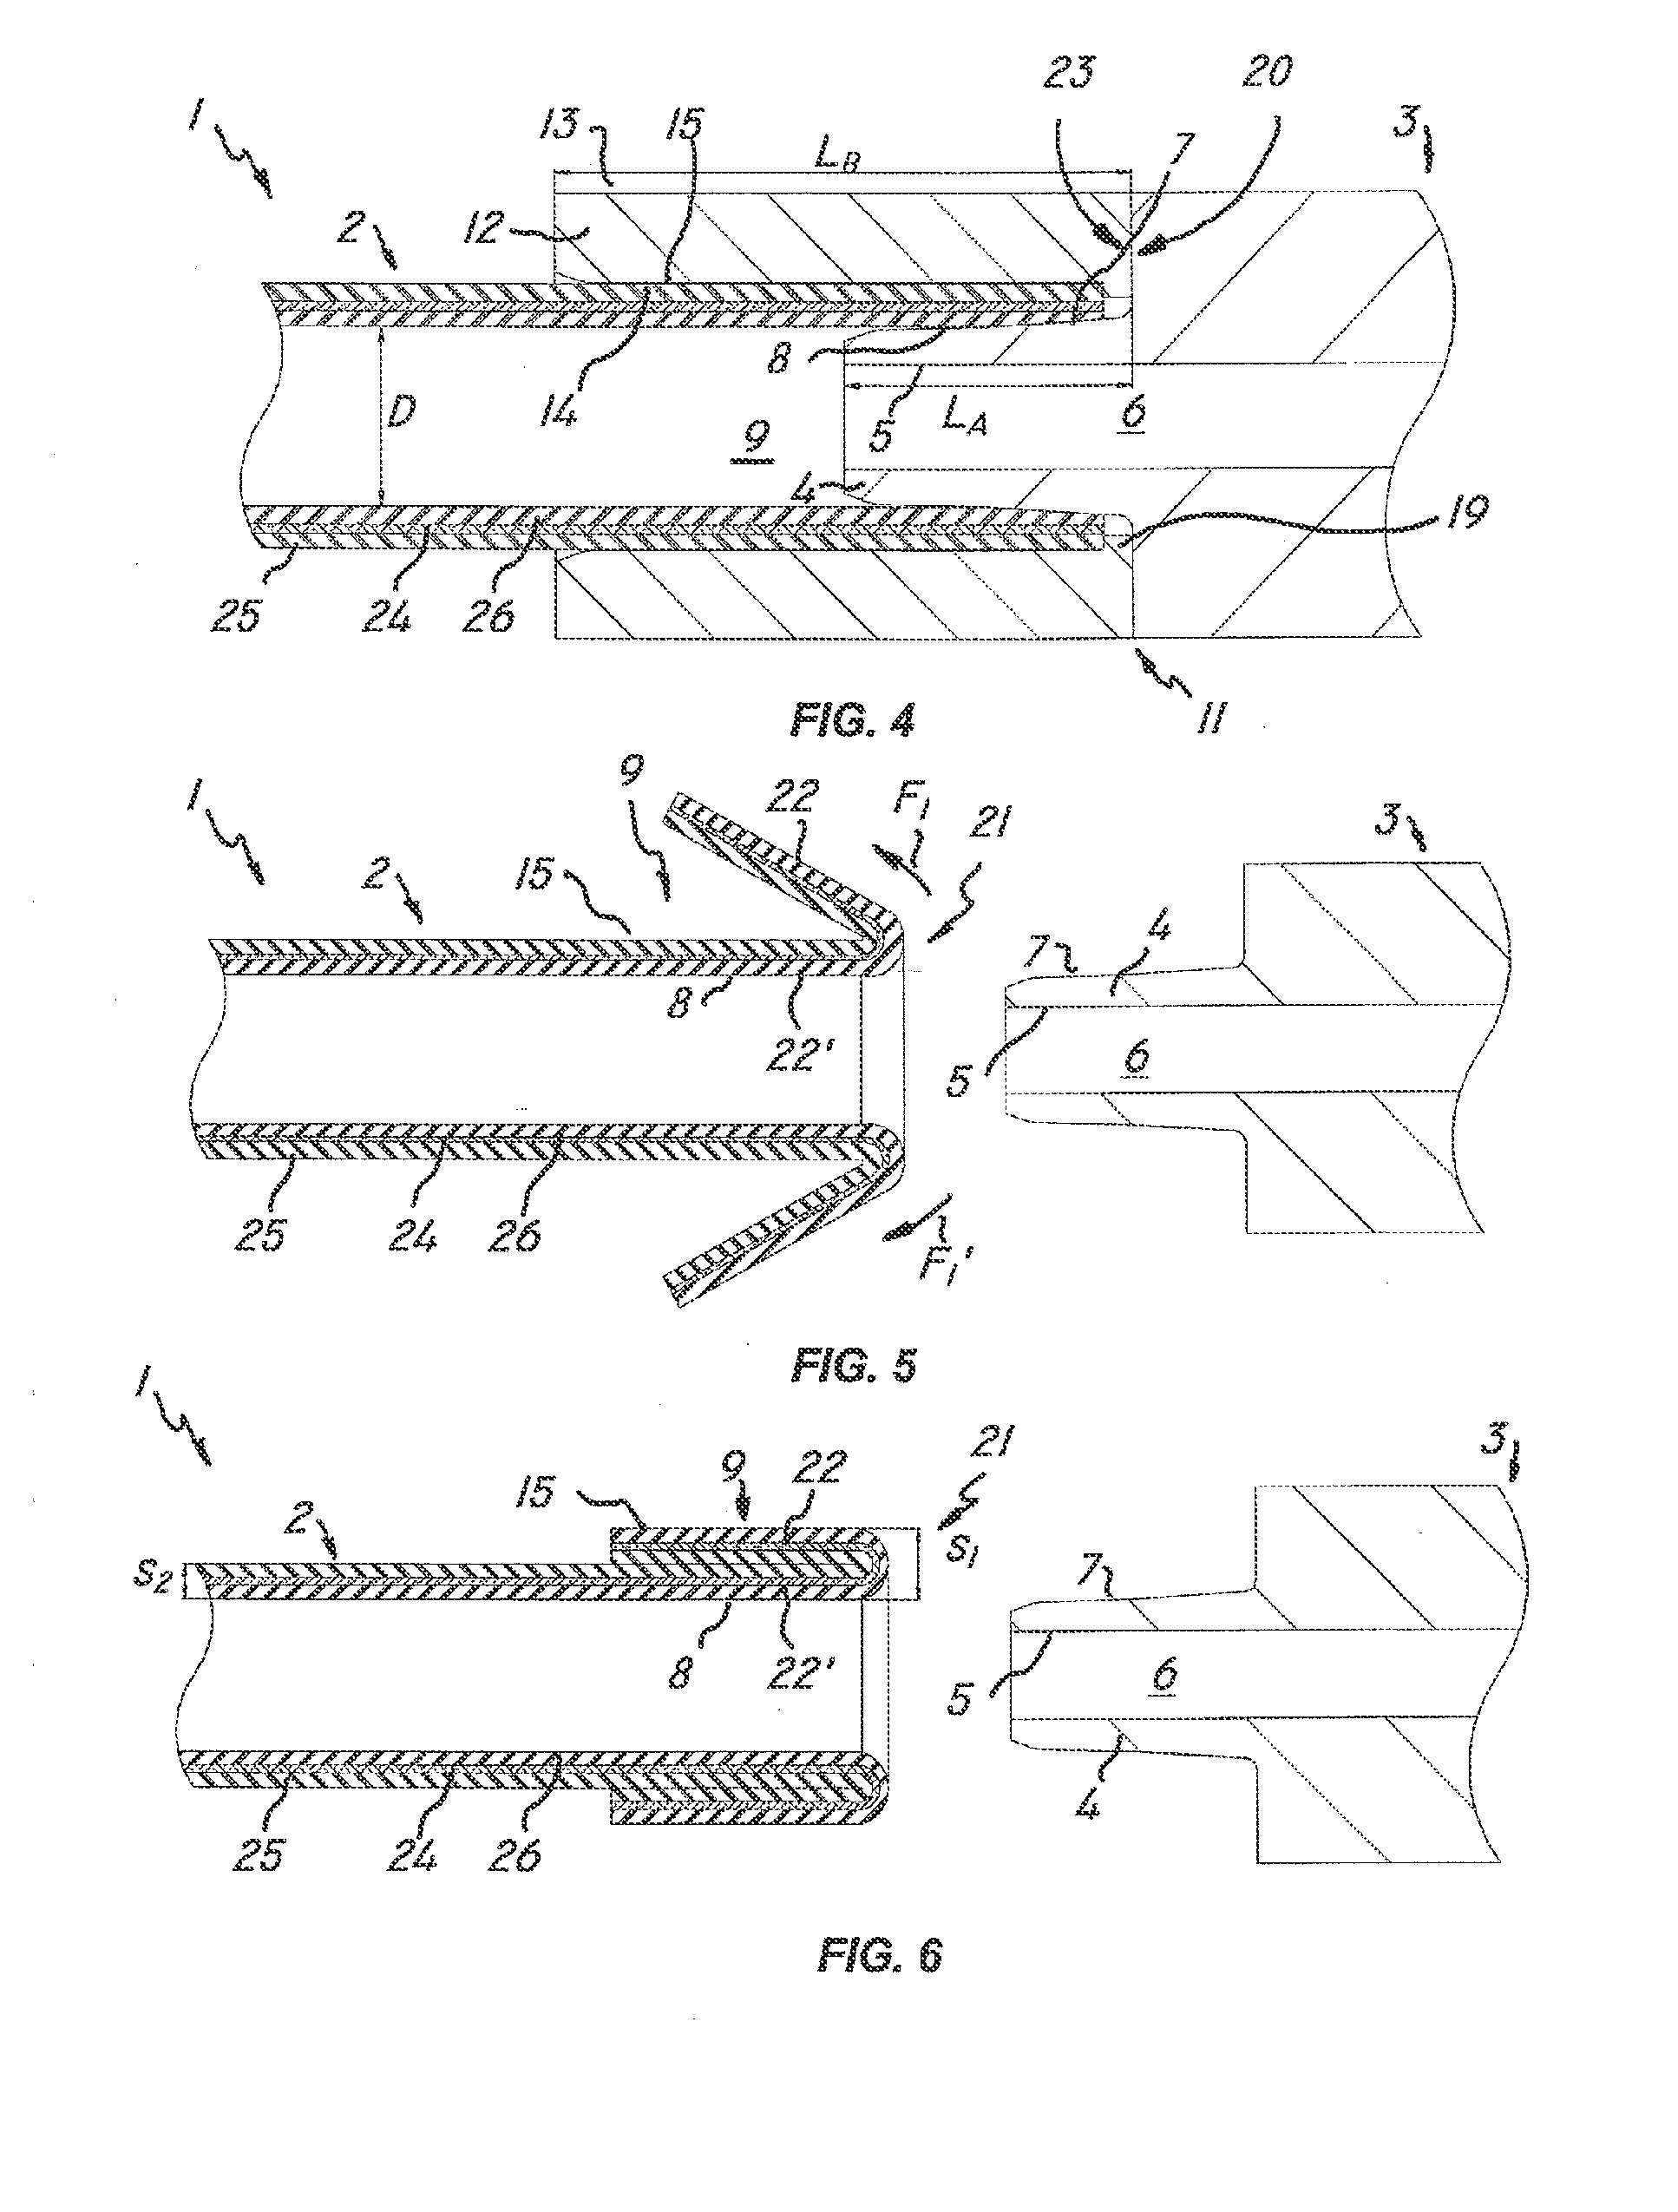 Integral pipe and fitting assembly of polymer material, and method of making same